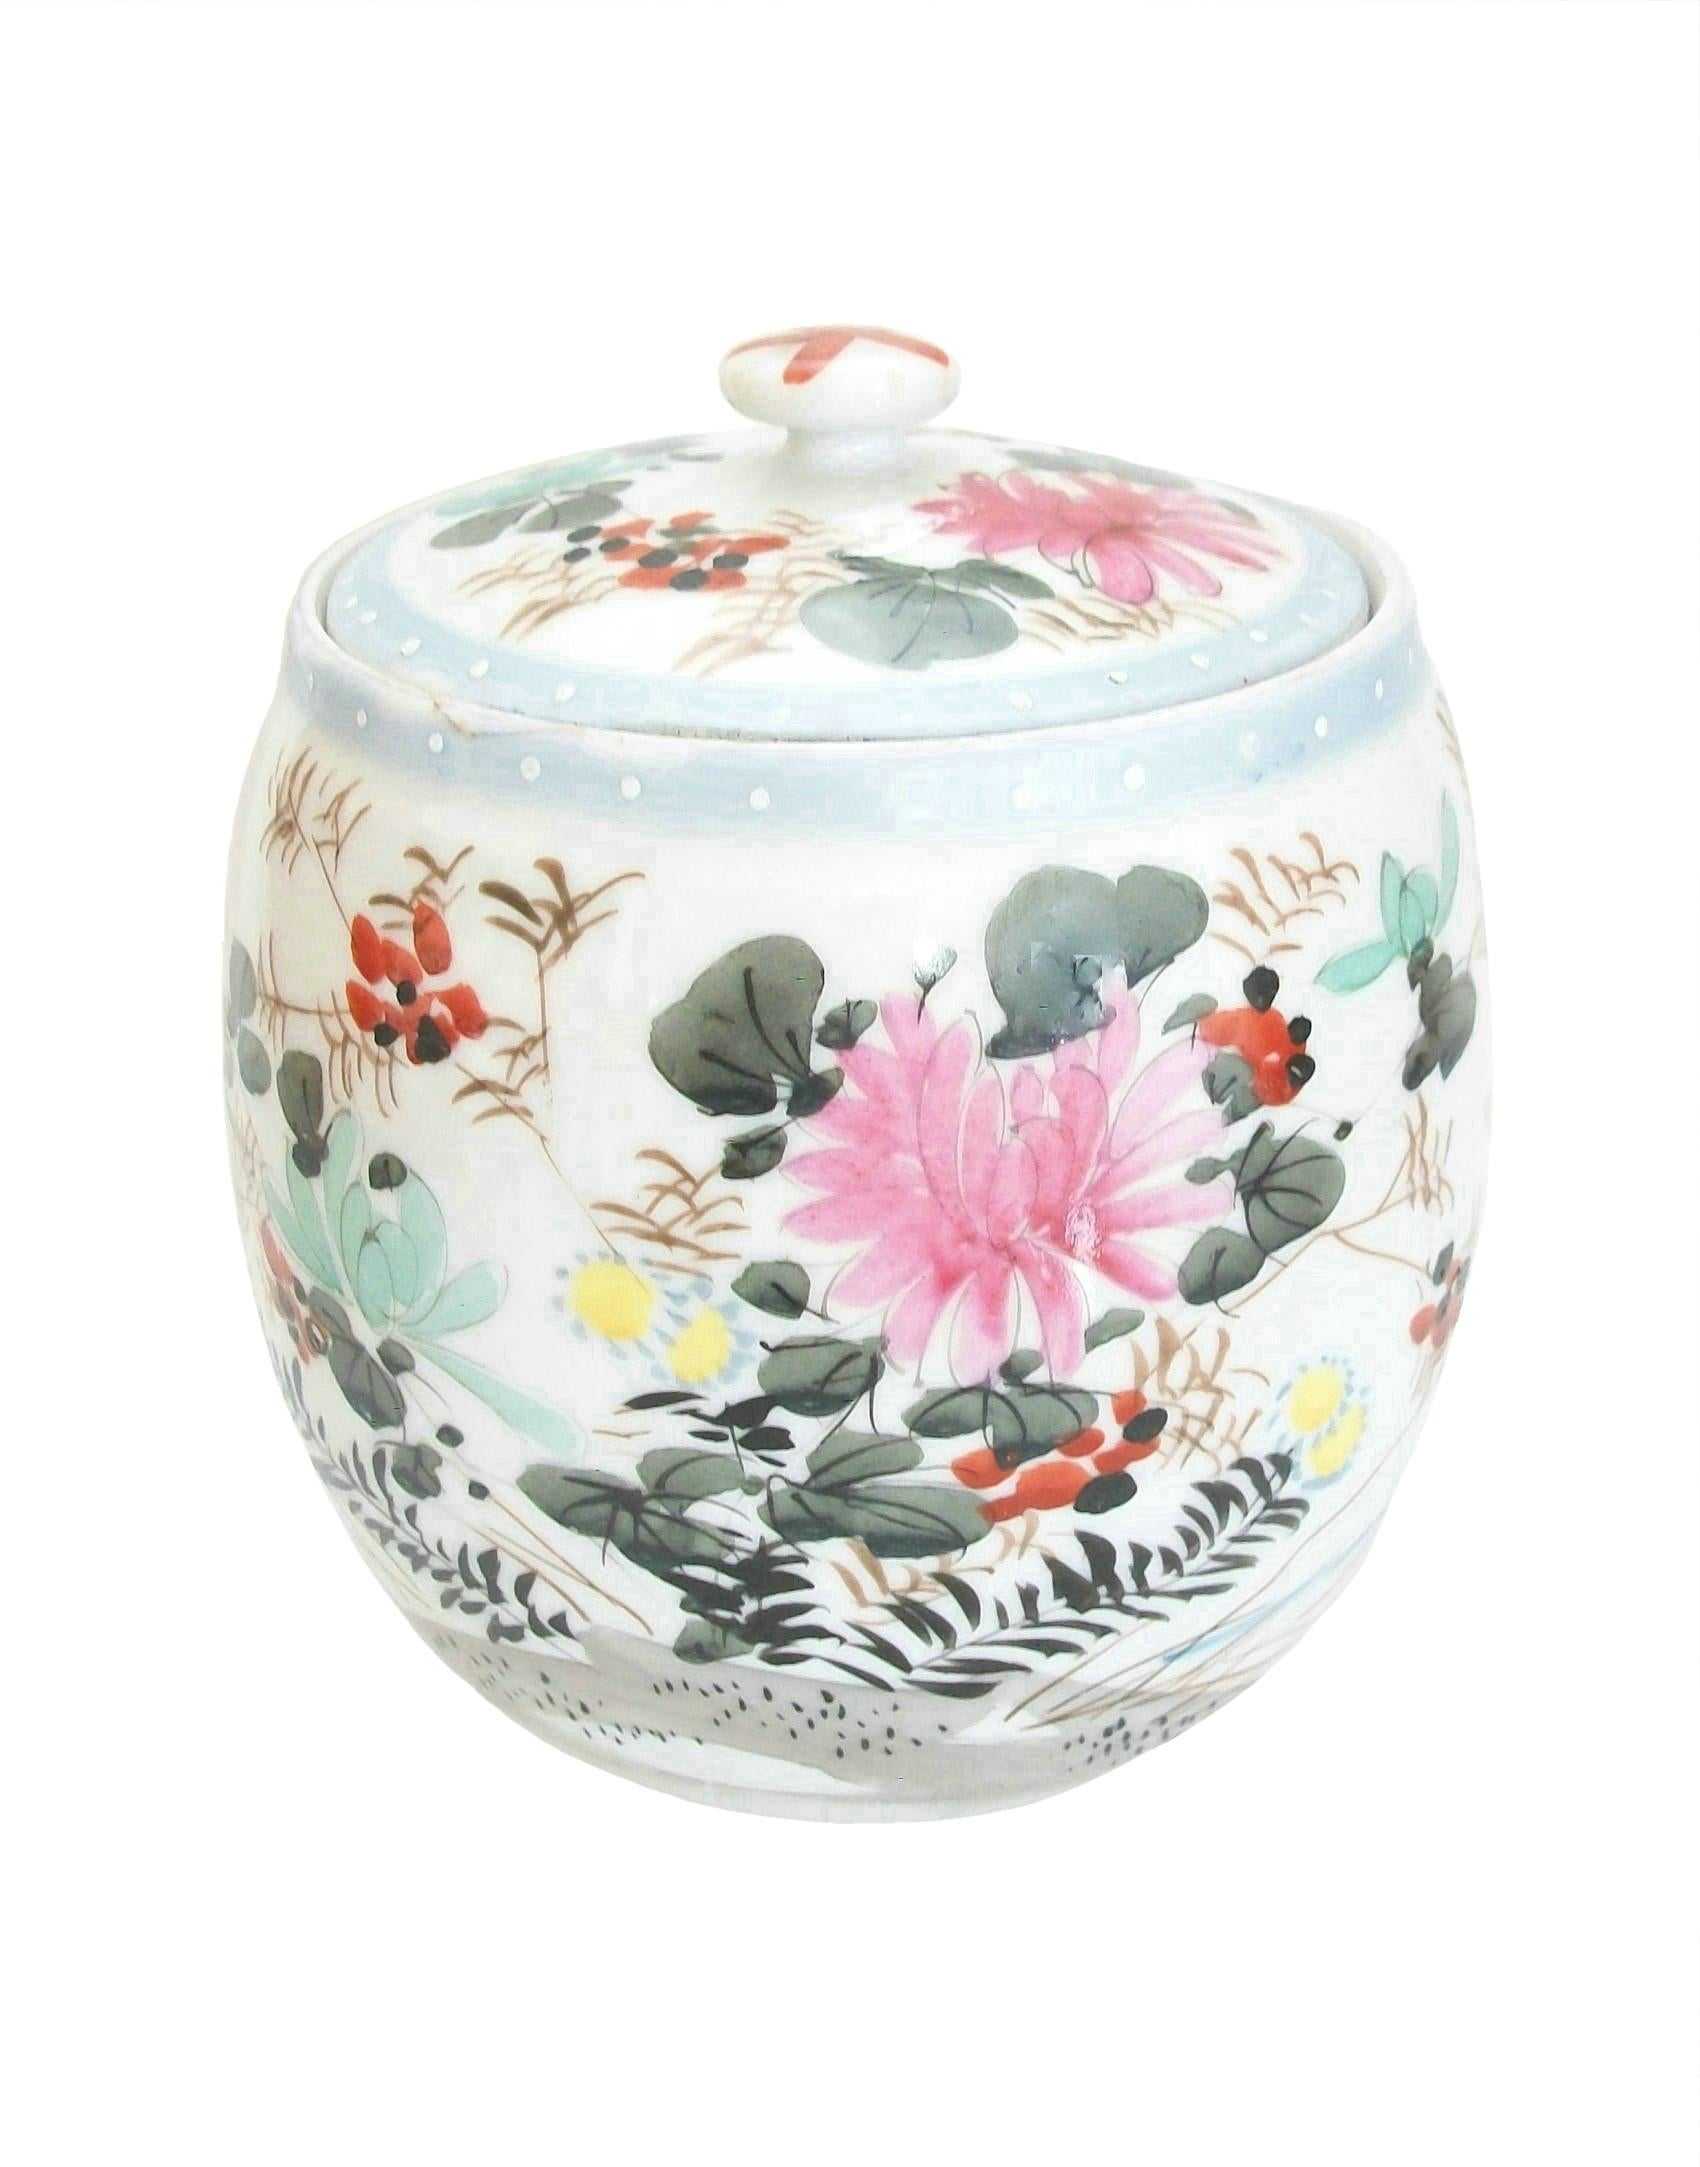 Antique Meiji period Wucai style hand painted porcelain jar and cover - featuring flowering branches of multicolor blossoms and leaves - all on a white ground with pale blue rim to the jar and lid - unglazed foot rim and base - unsigned - Japan -